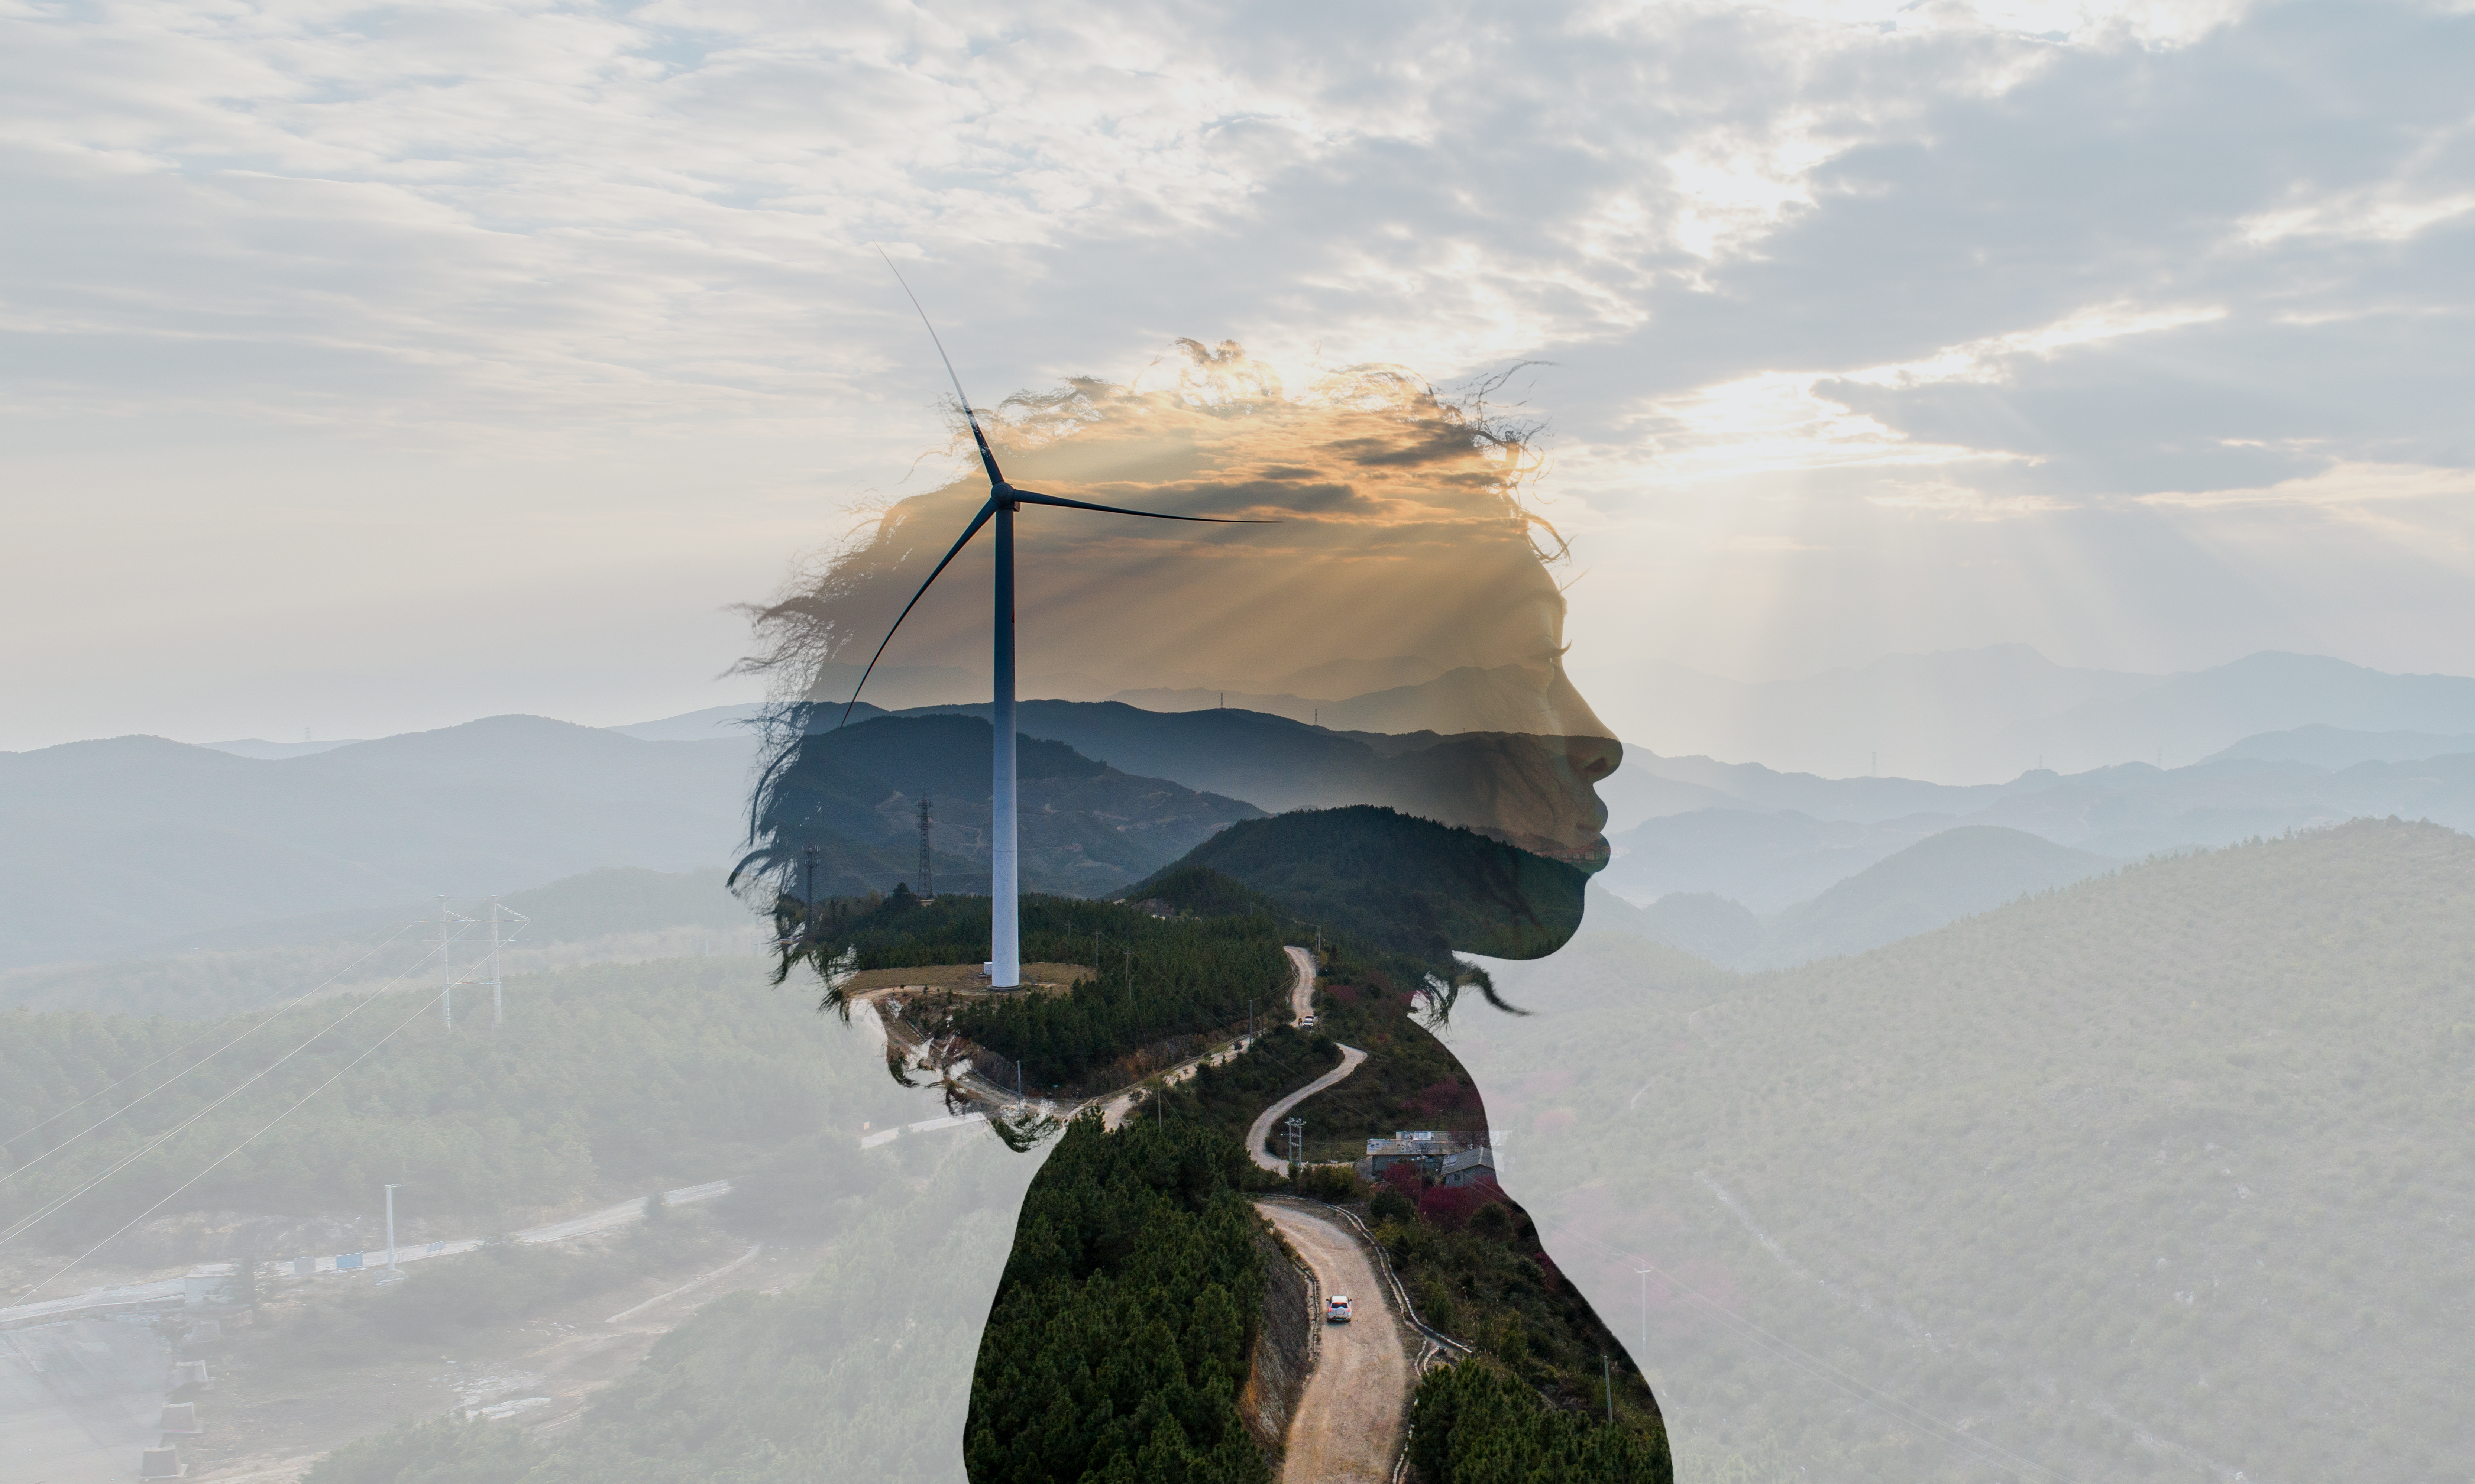 The outline of a woman's head superimposed over mountains and a wind turbine